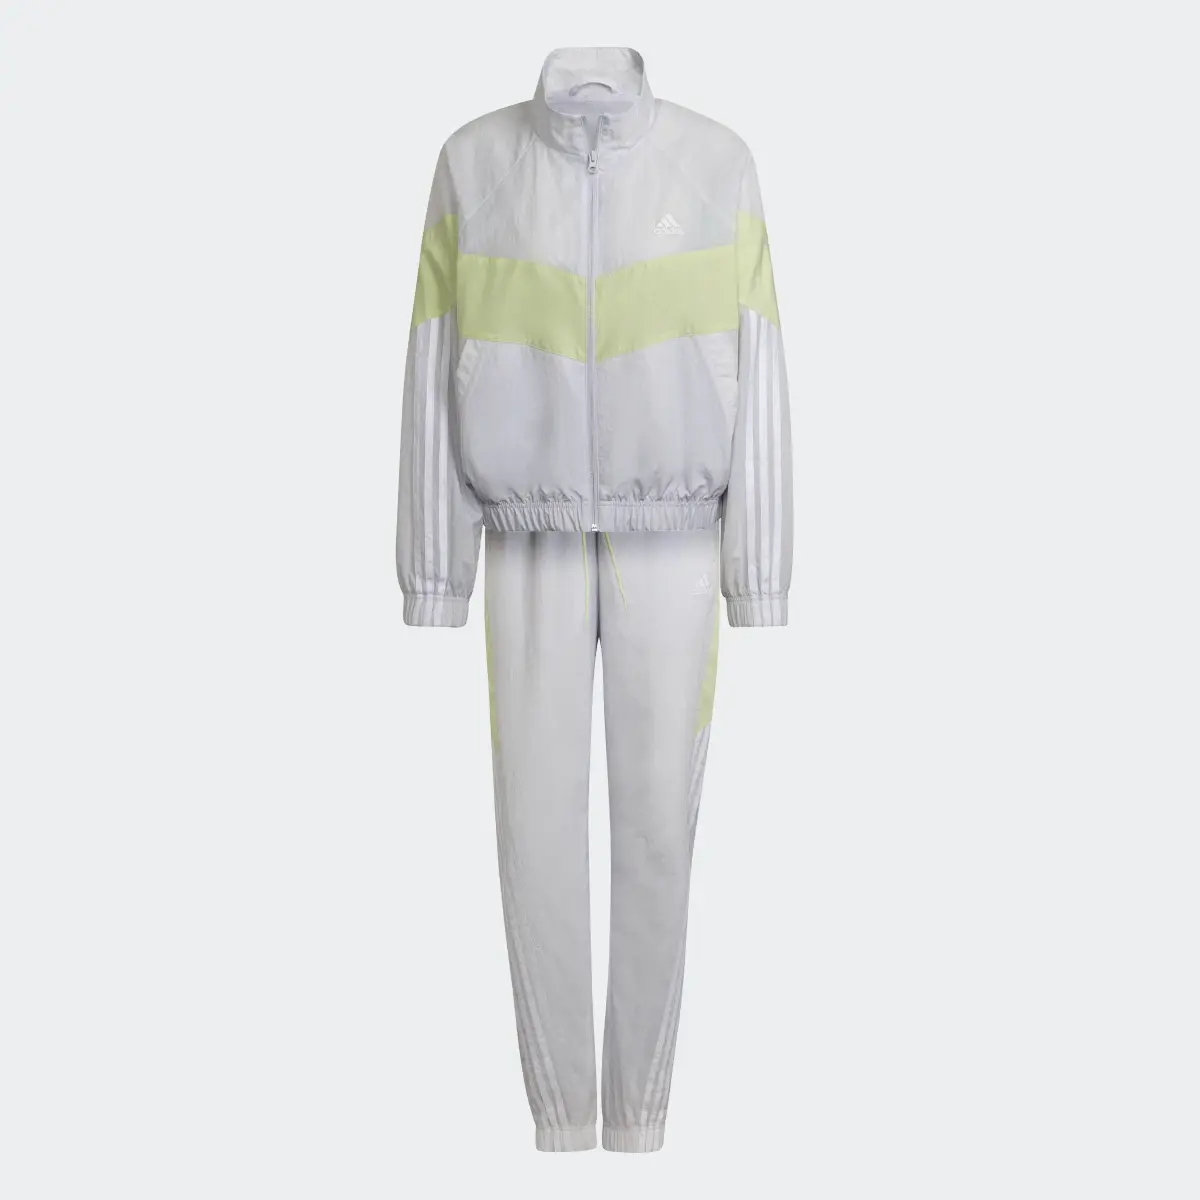 Adidas Sportswear Game Time Track Suit. 1